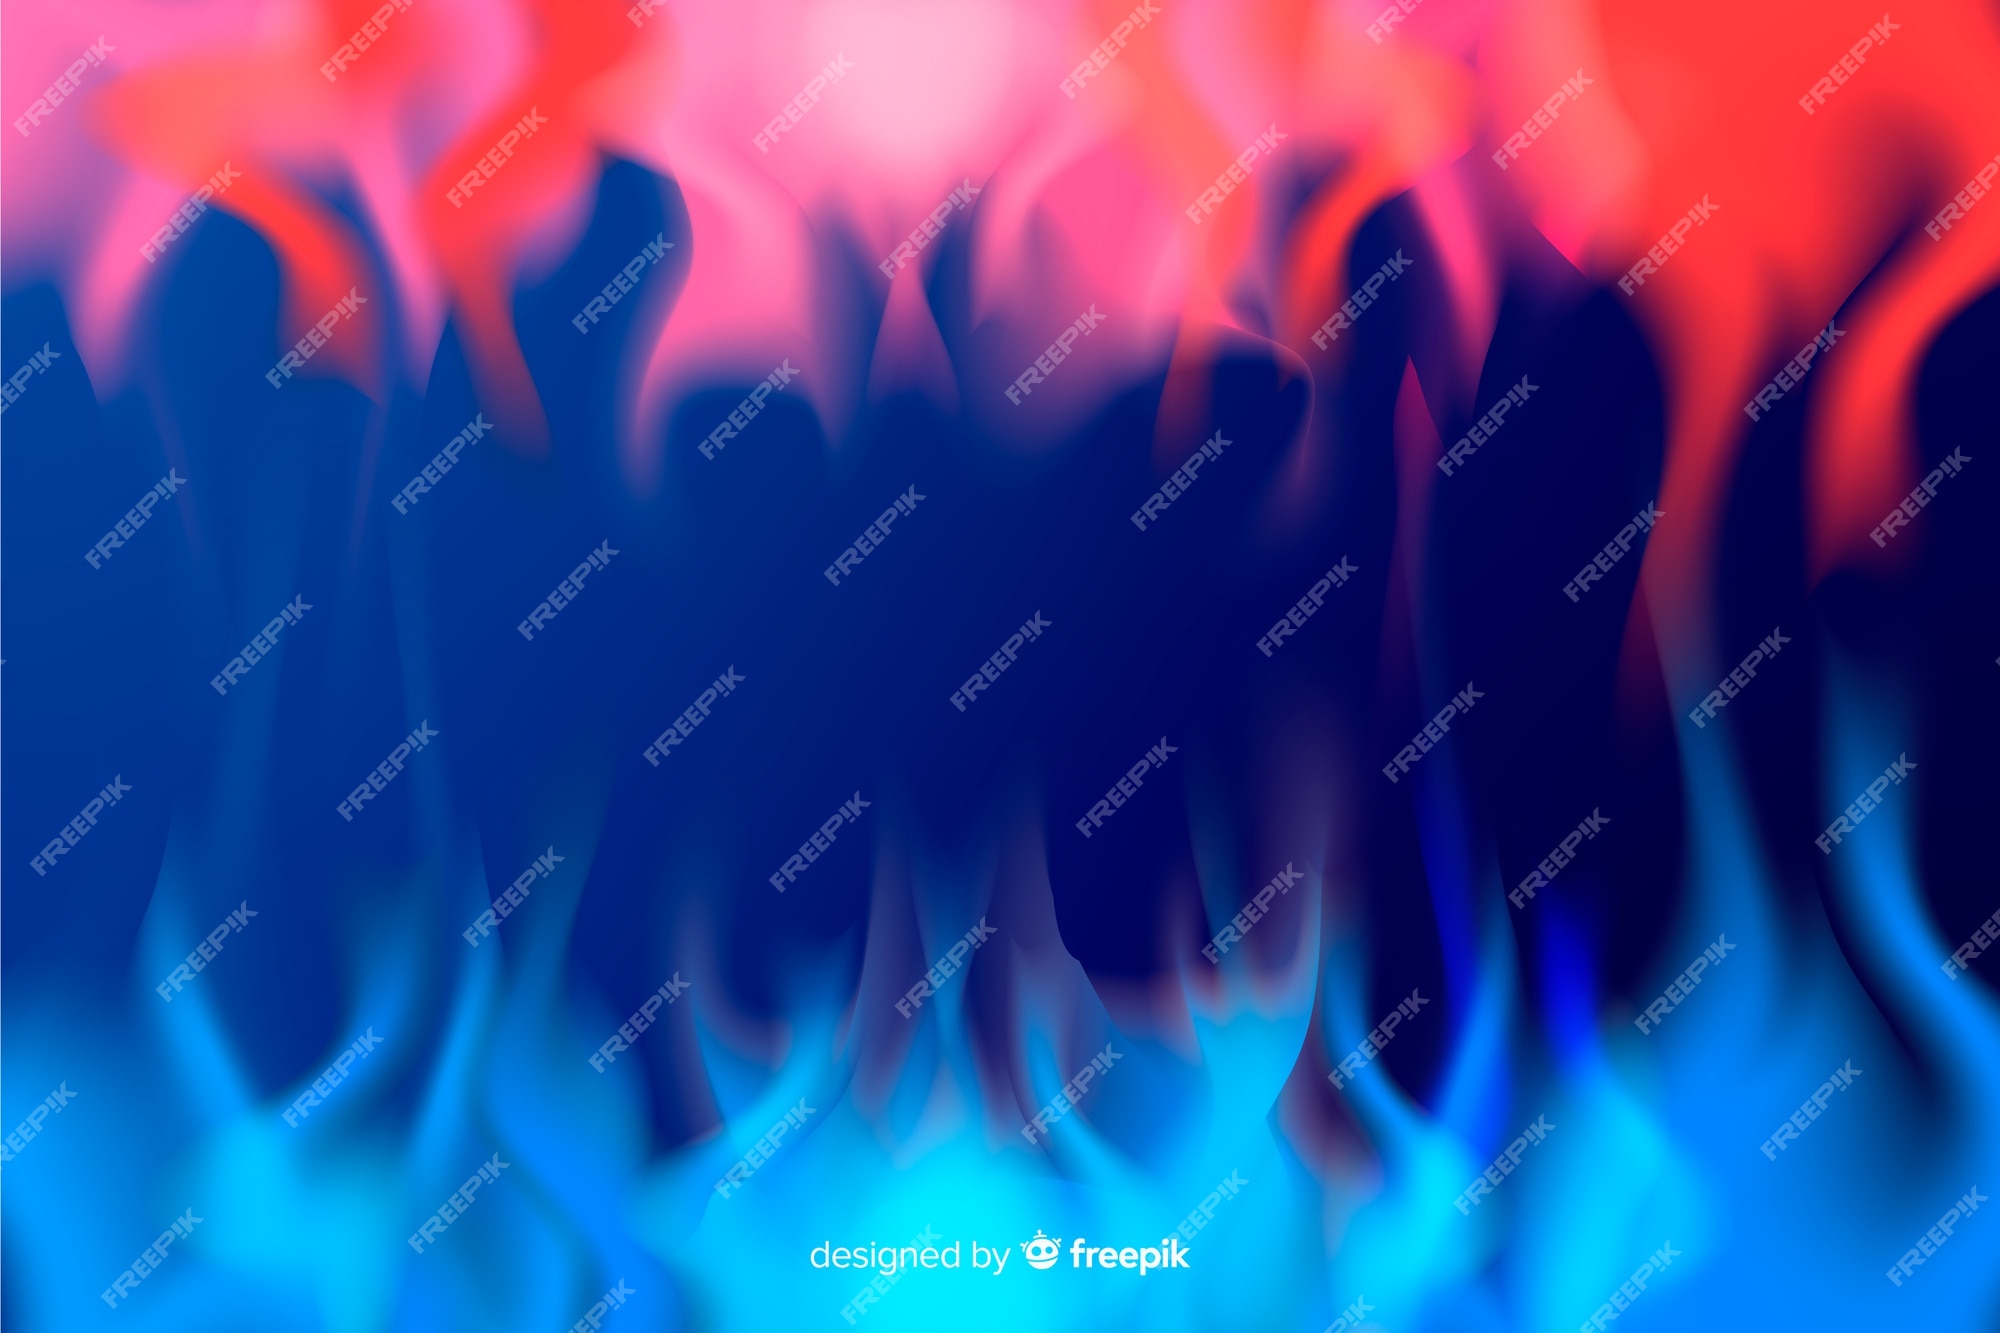 Blue Red Fire Images - Free Download on Freepik